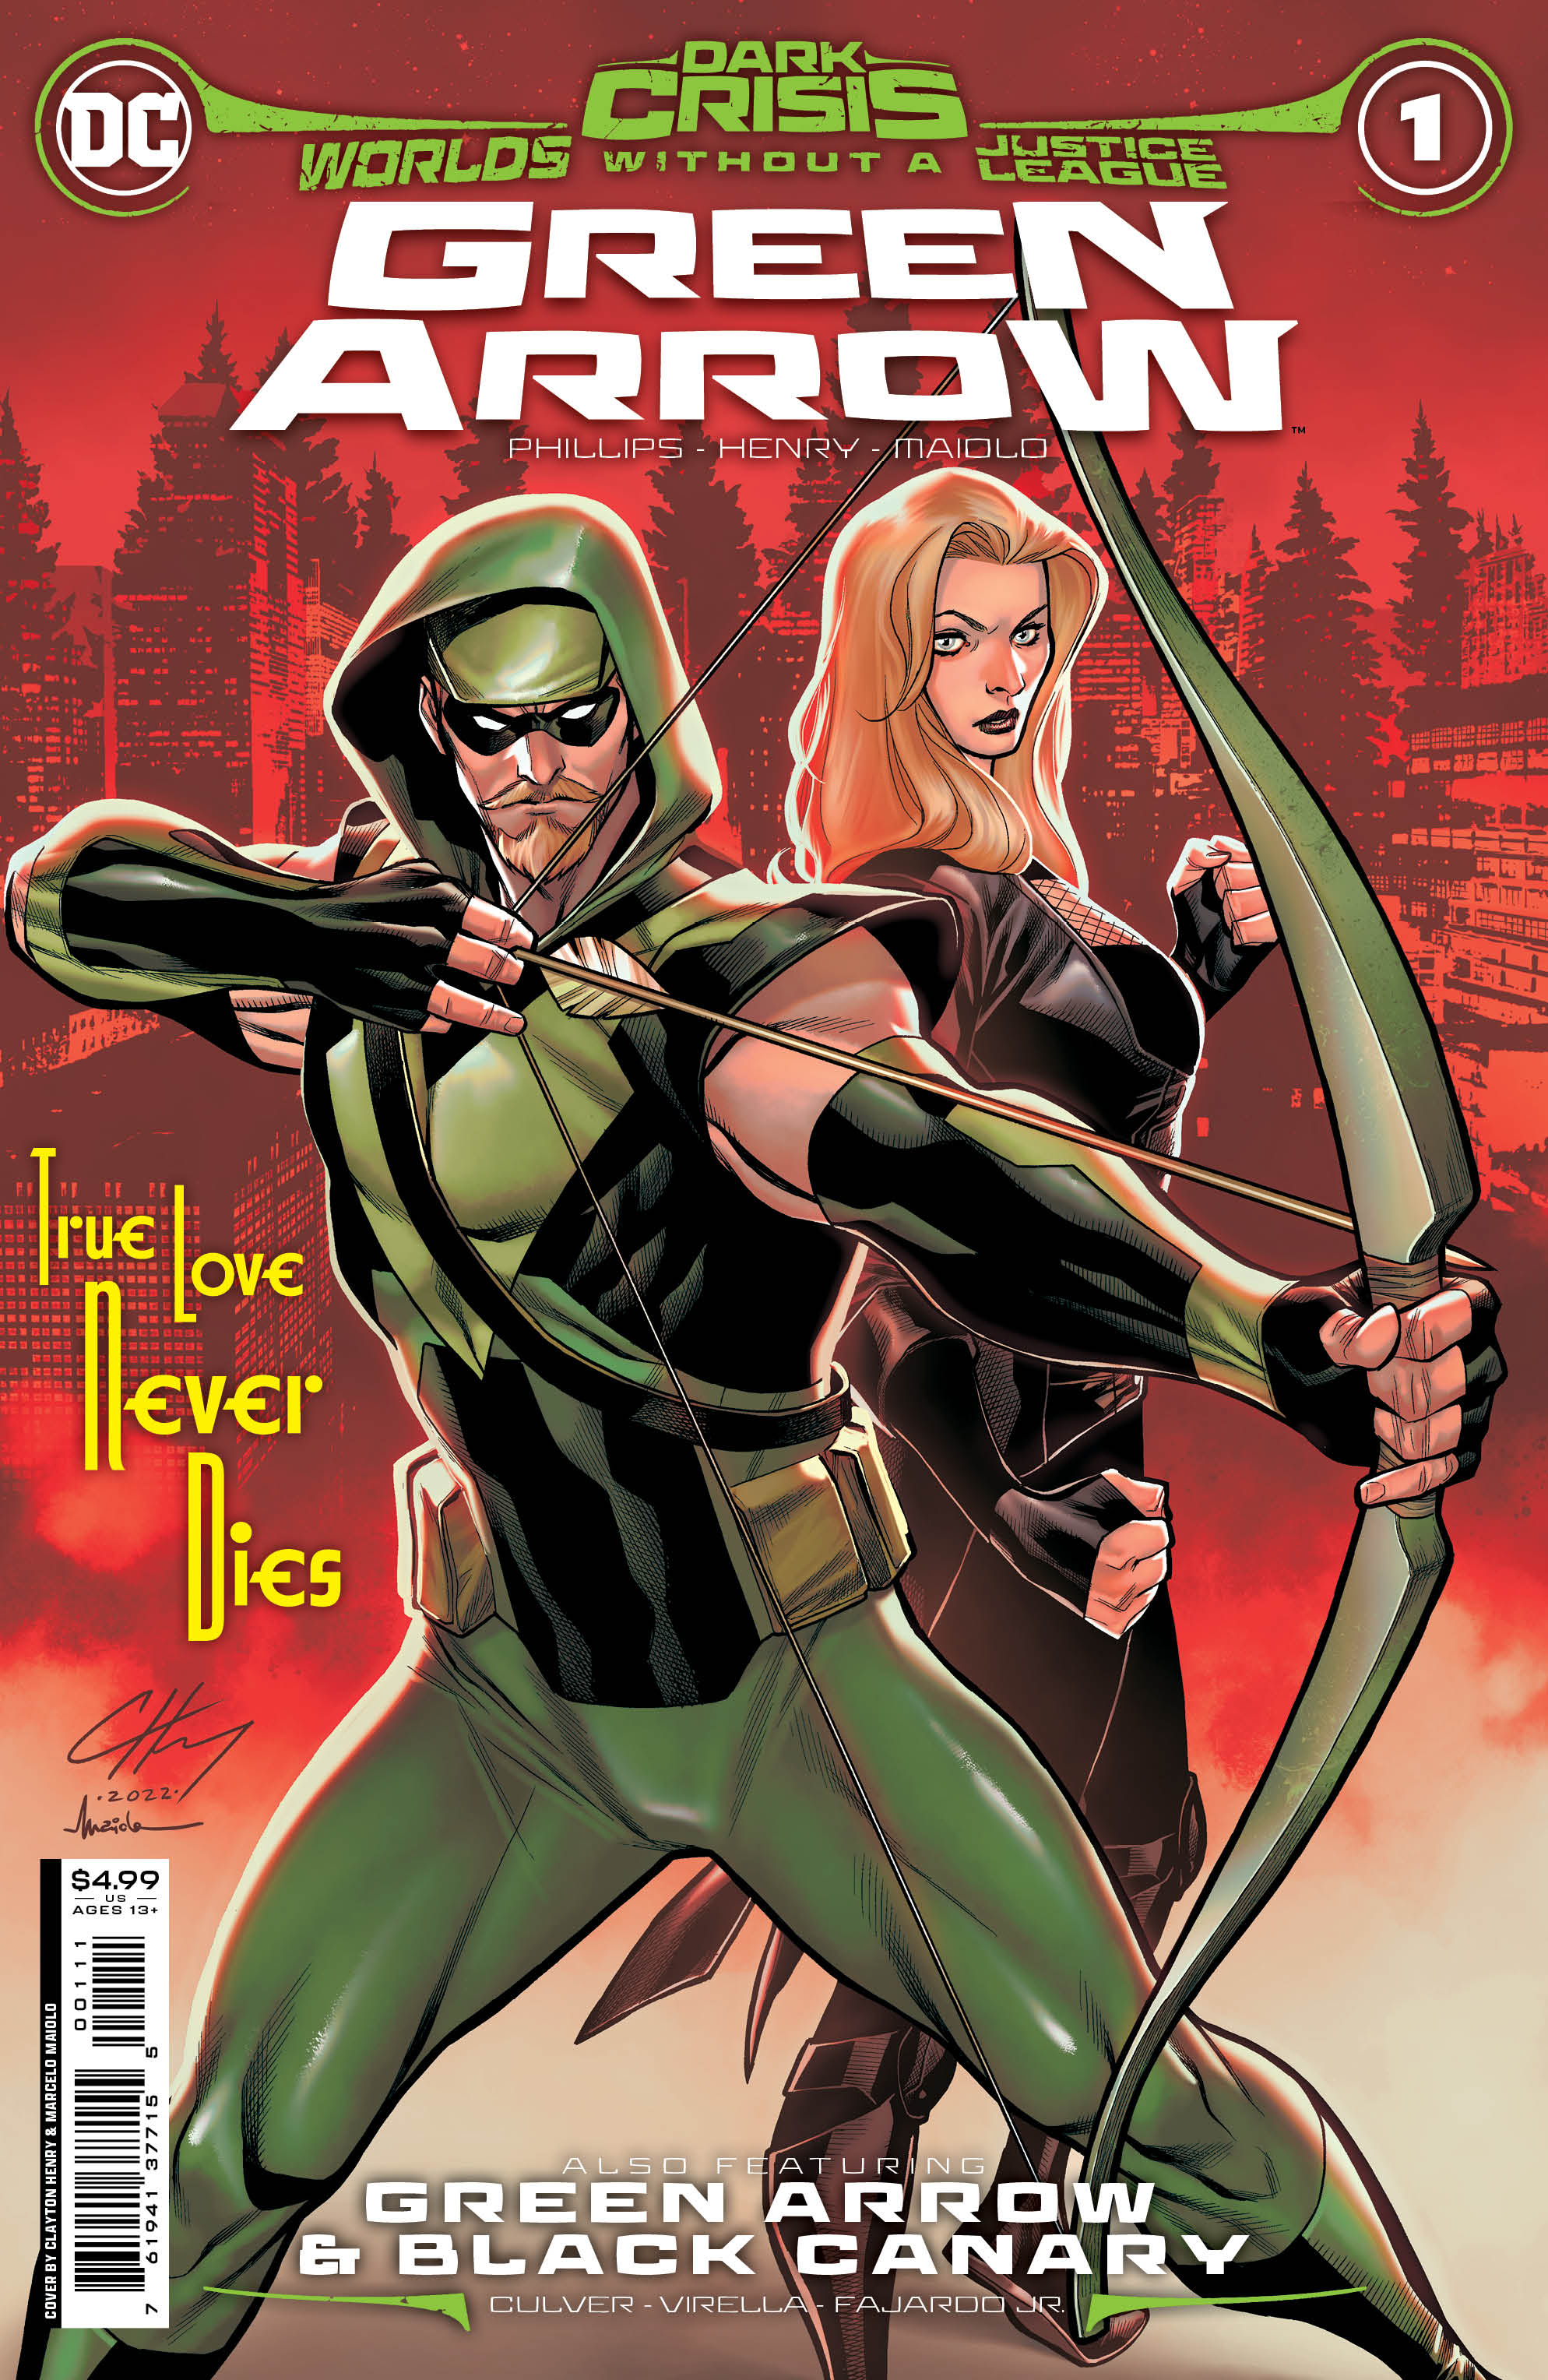 Dark Crisis Worlds Without A Justice League Green Arrow #1 (One Shot) Cover A Clayton Henry